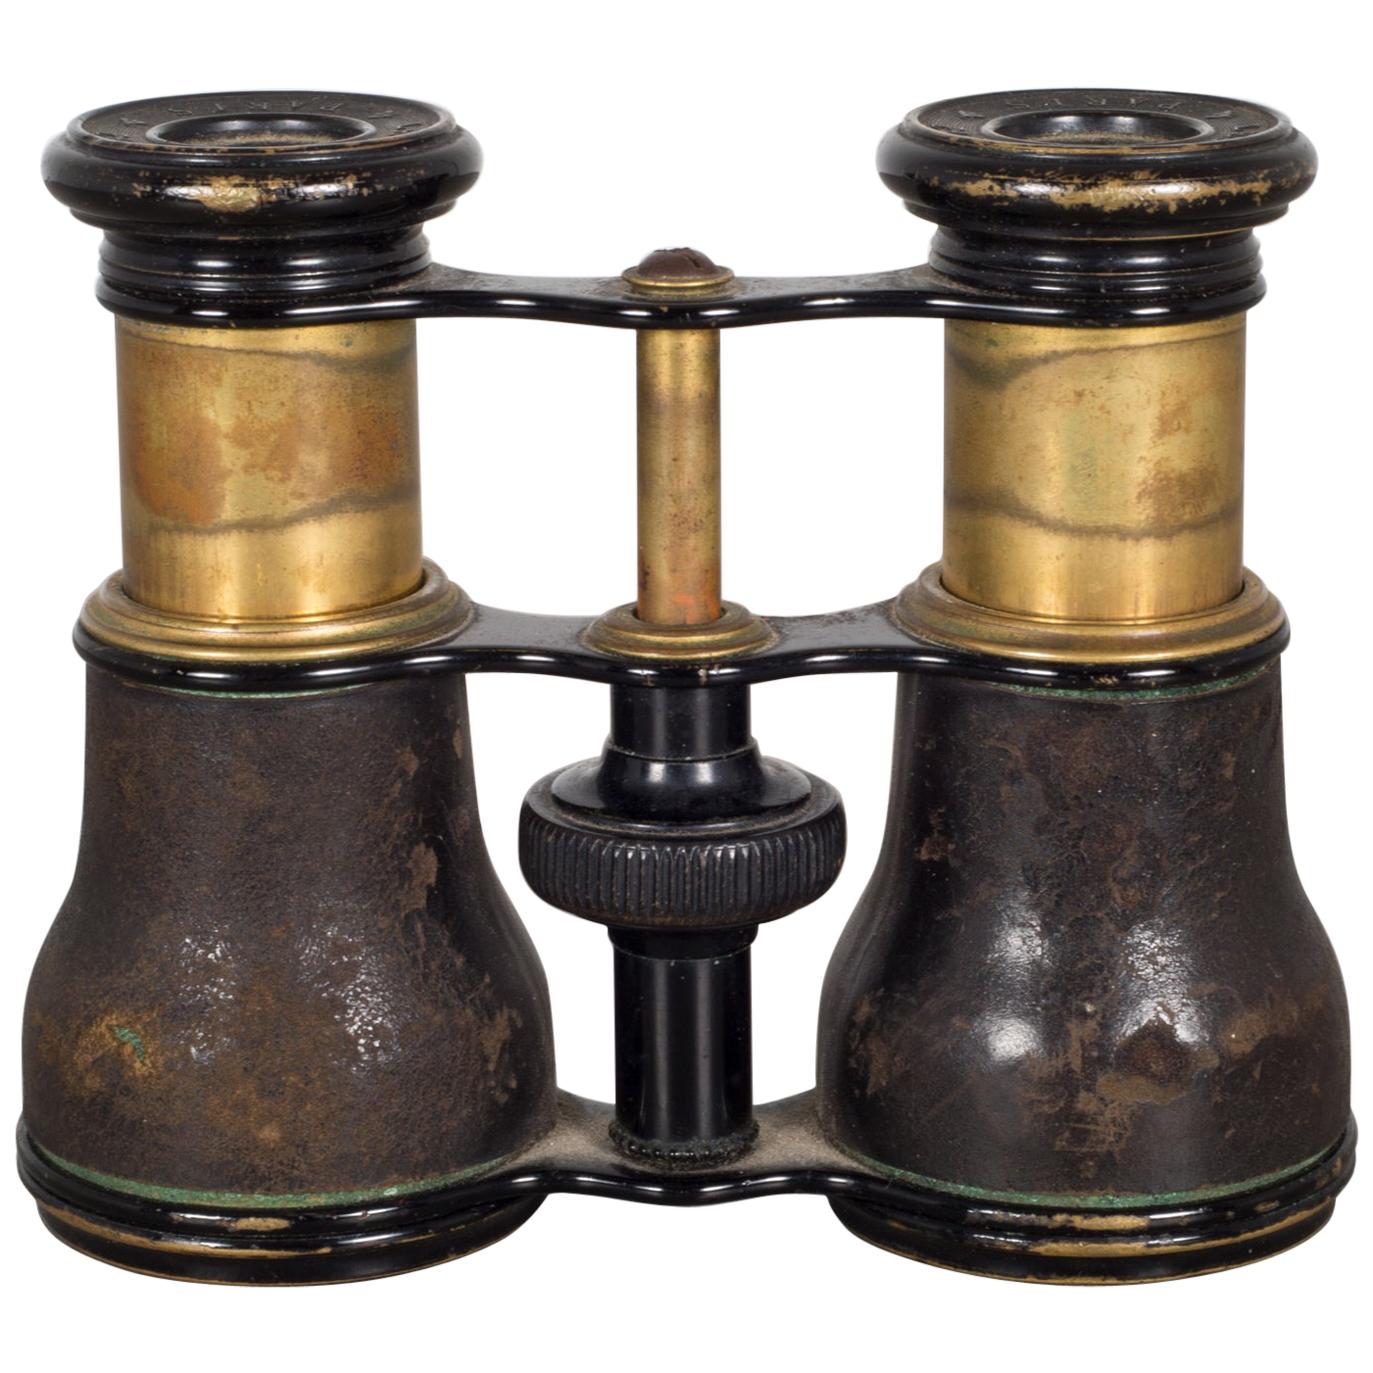 French Leather/Brass Opera Glasses by Le Maire Fabt, Paris, circa 1880